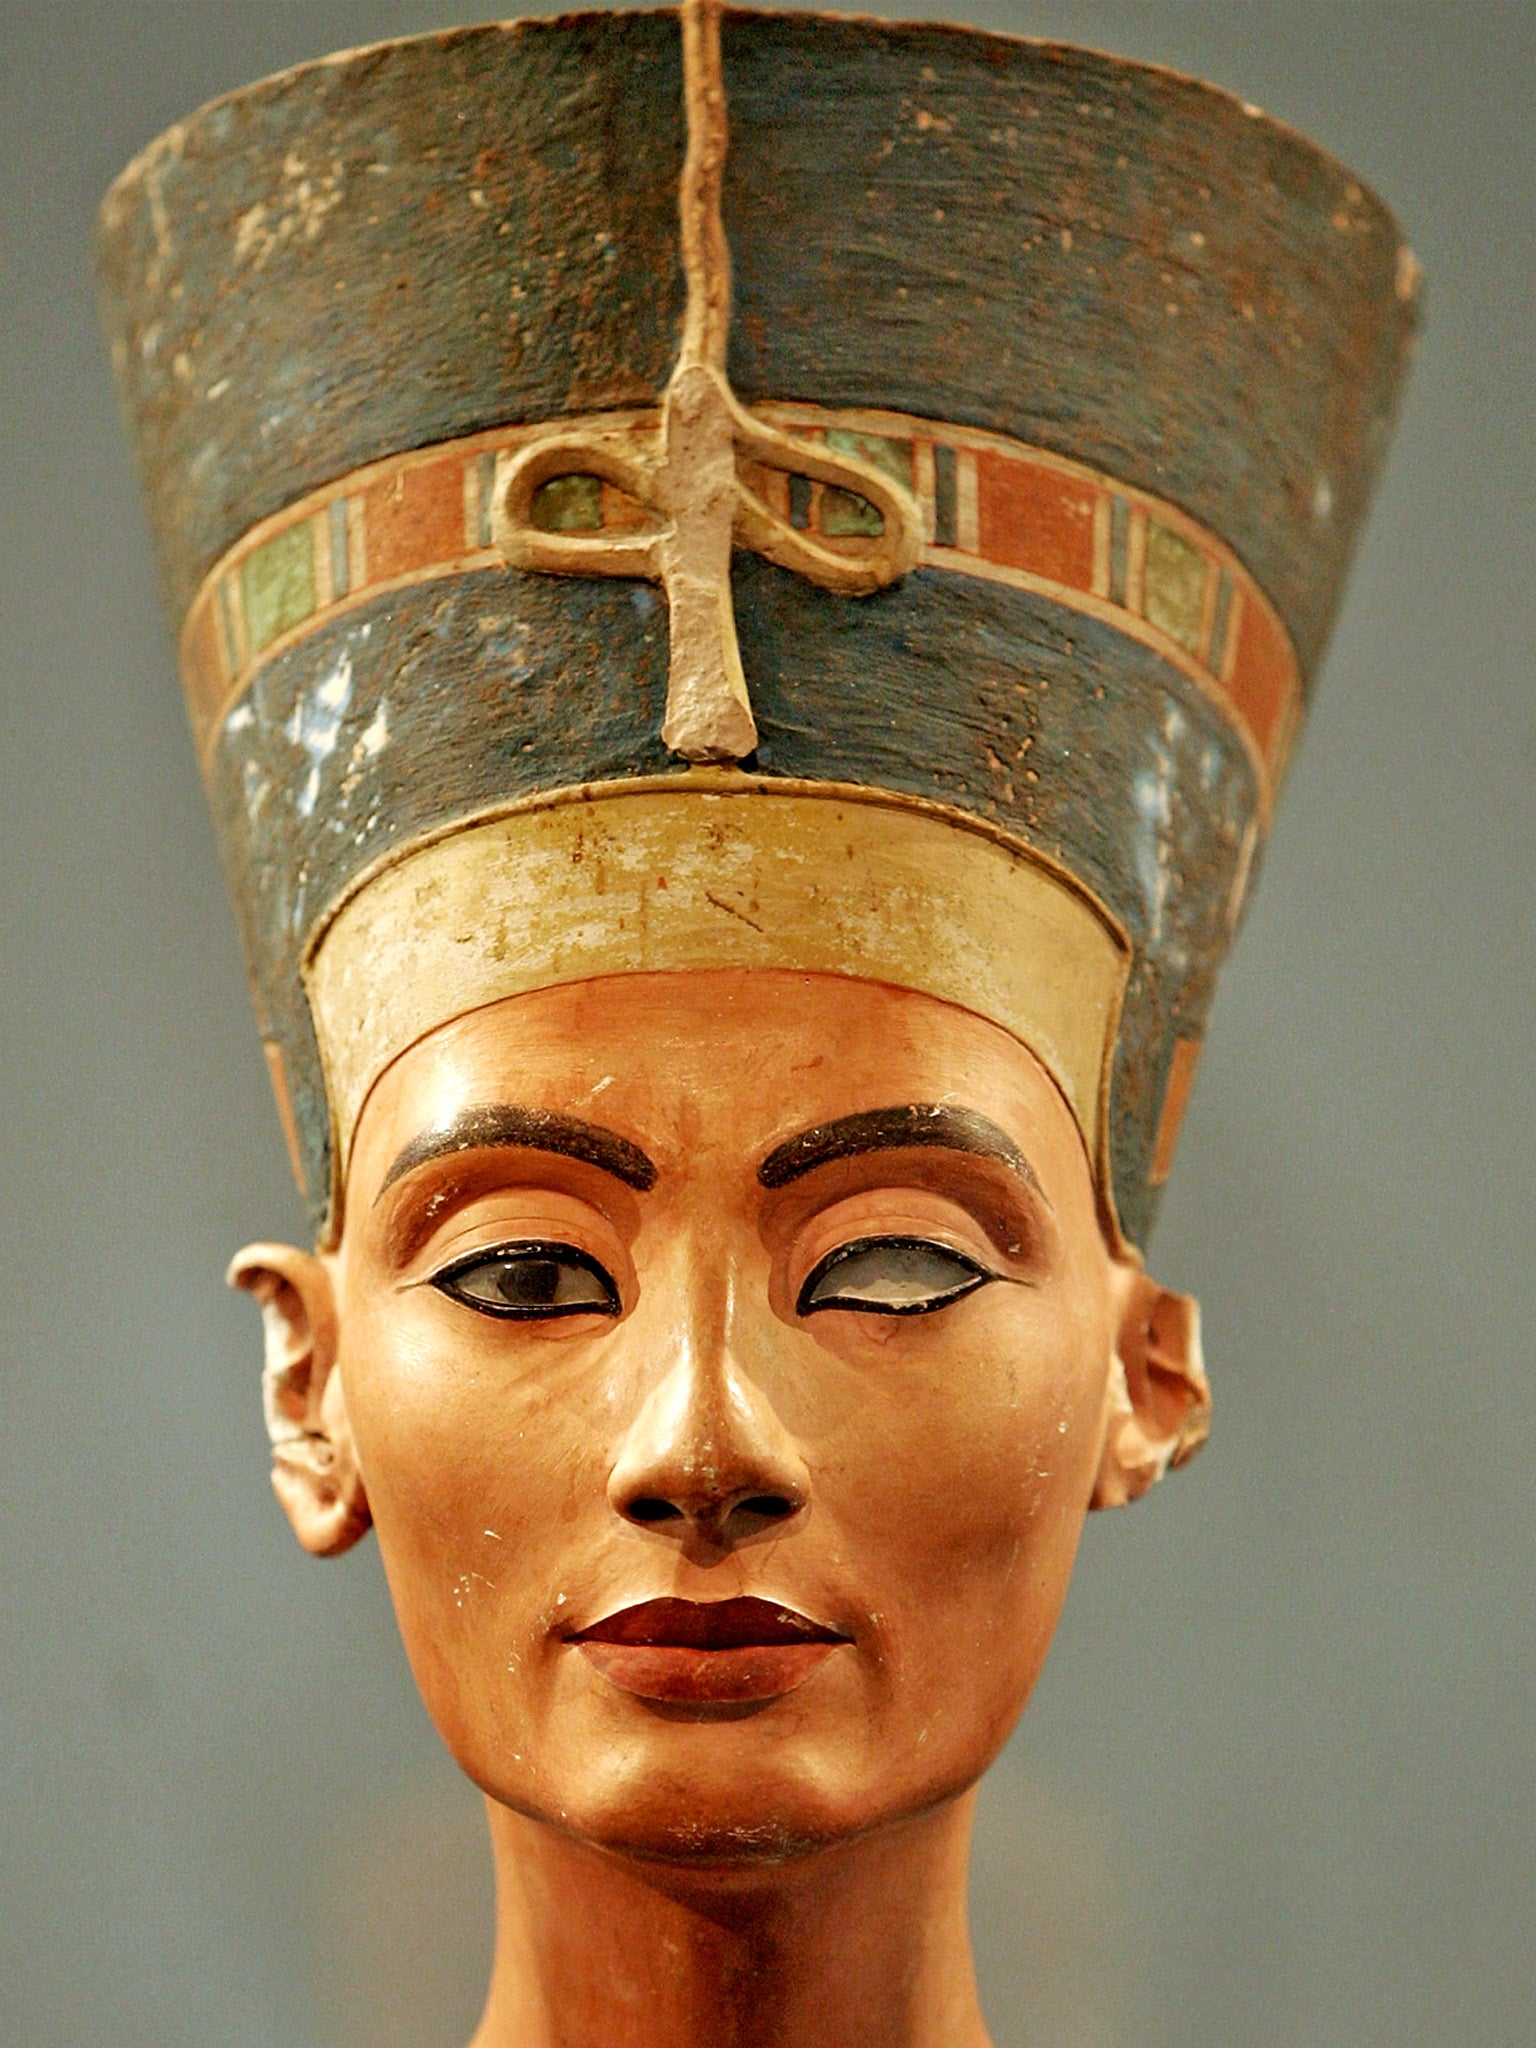 The bust of Nefertiti is now displayed at Altes Museum